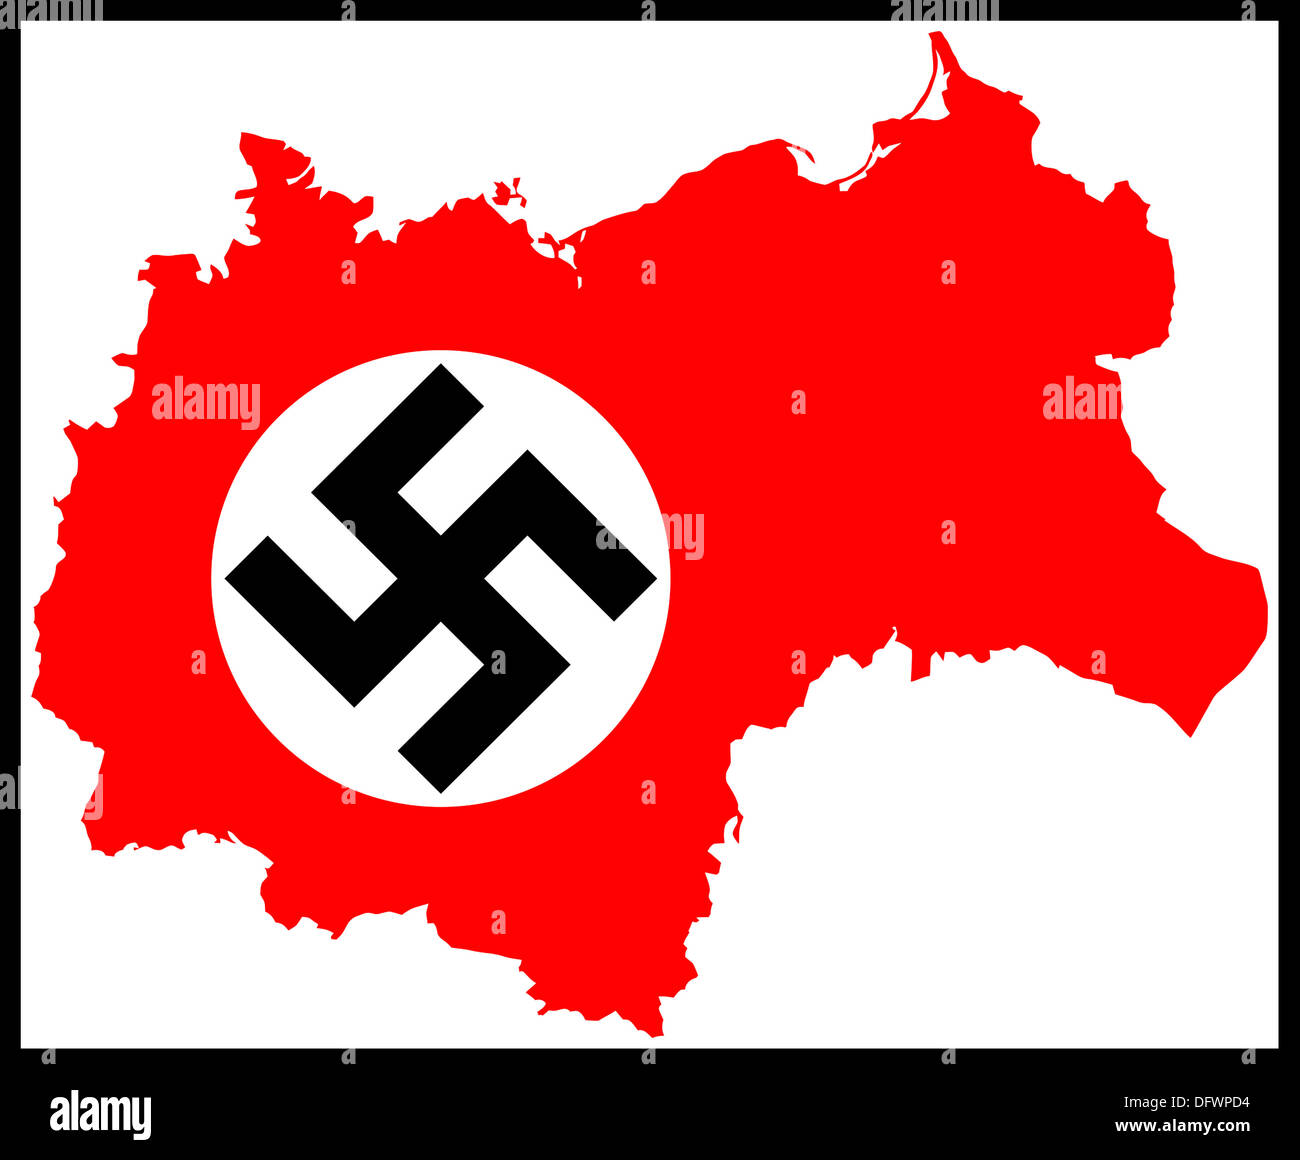 German Nazi Swastika flag on red outline map of occupied countries during WW2 1939-1945. German occupation. Stock Photo